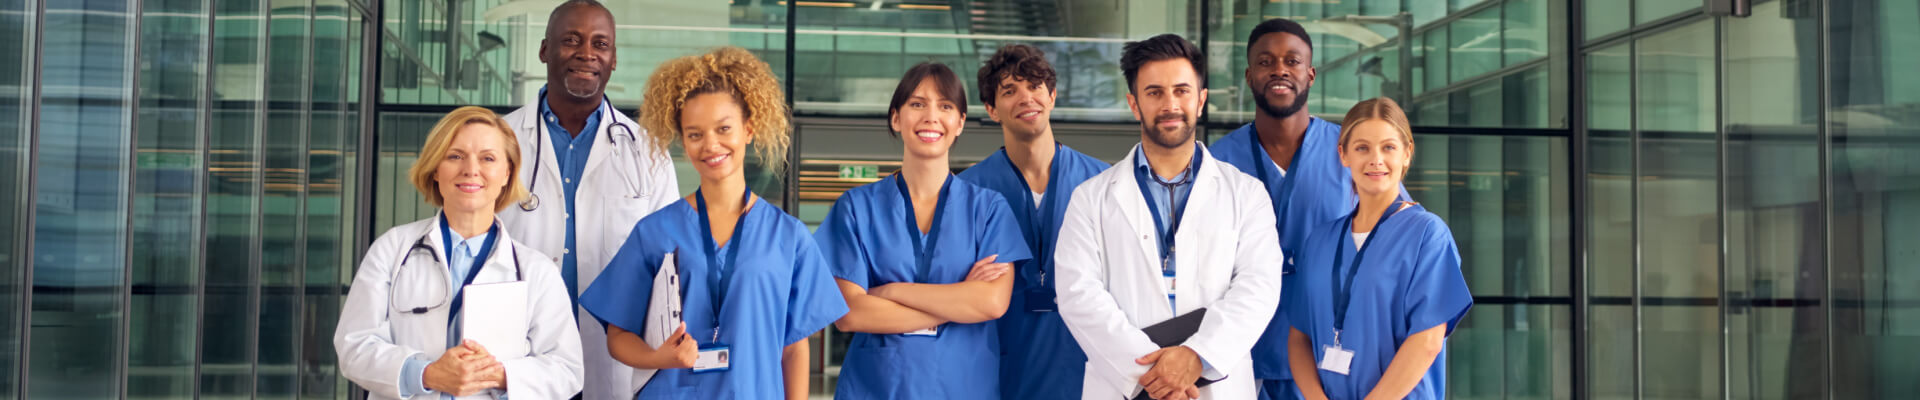 team of health care professionals outside of hospital posing for a photo